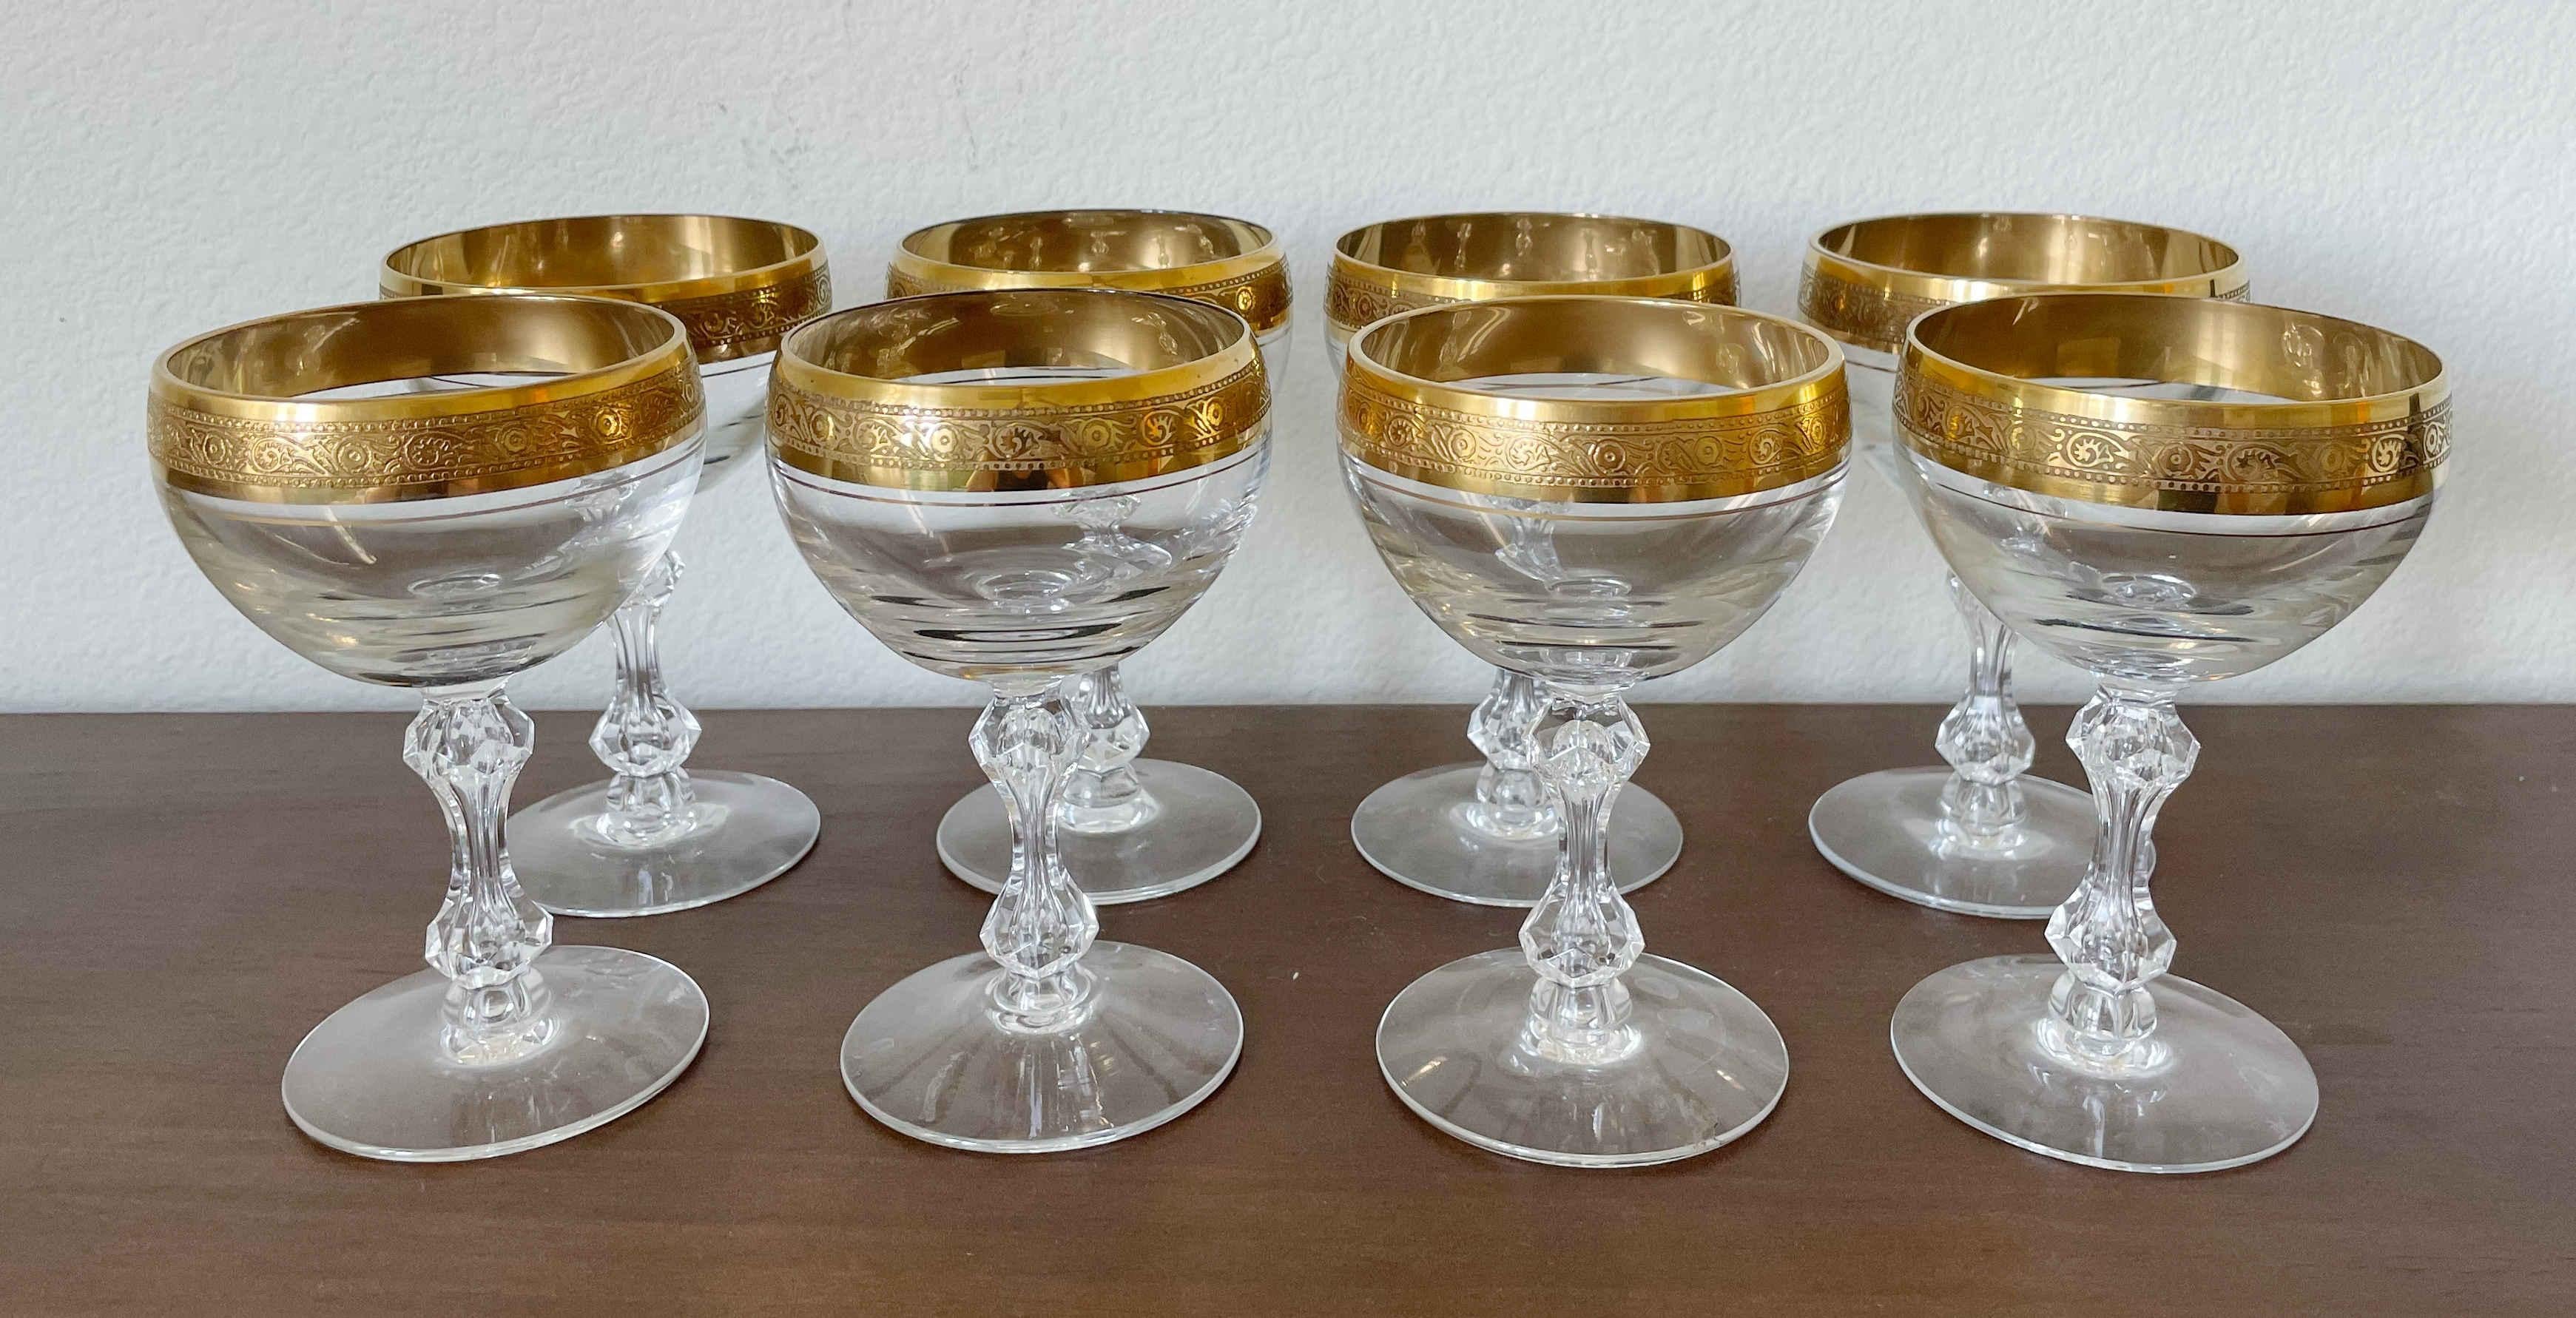 Set of 8 wine glasses with gilt ornament edge and crystal stem / Made in Germany circa 1980s
Measures: diameter 3.5 inches / height 5.5 inches.
1 Set available in stock in Los Angeles, please note 1 glass has a small chip on the base.
 